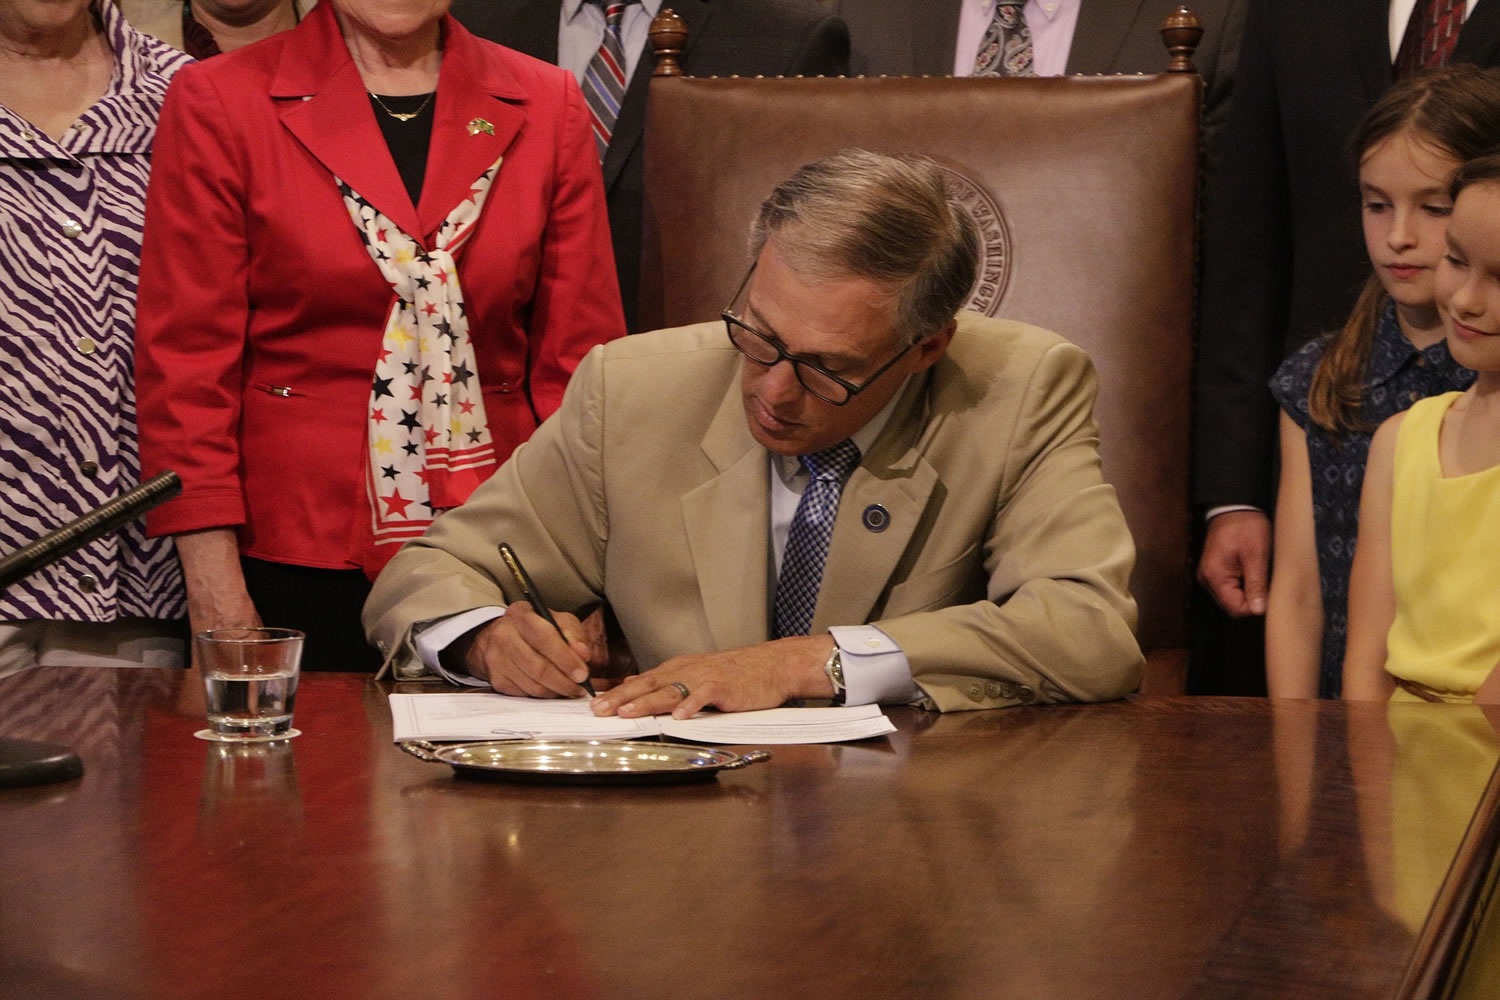 Gov. Jay Inslee signs a bill cutting tuition at the state's colleges and universities Monday in Olympia. National experts on college tuition have called Washington's tuition cut a rare move that could influence other states.